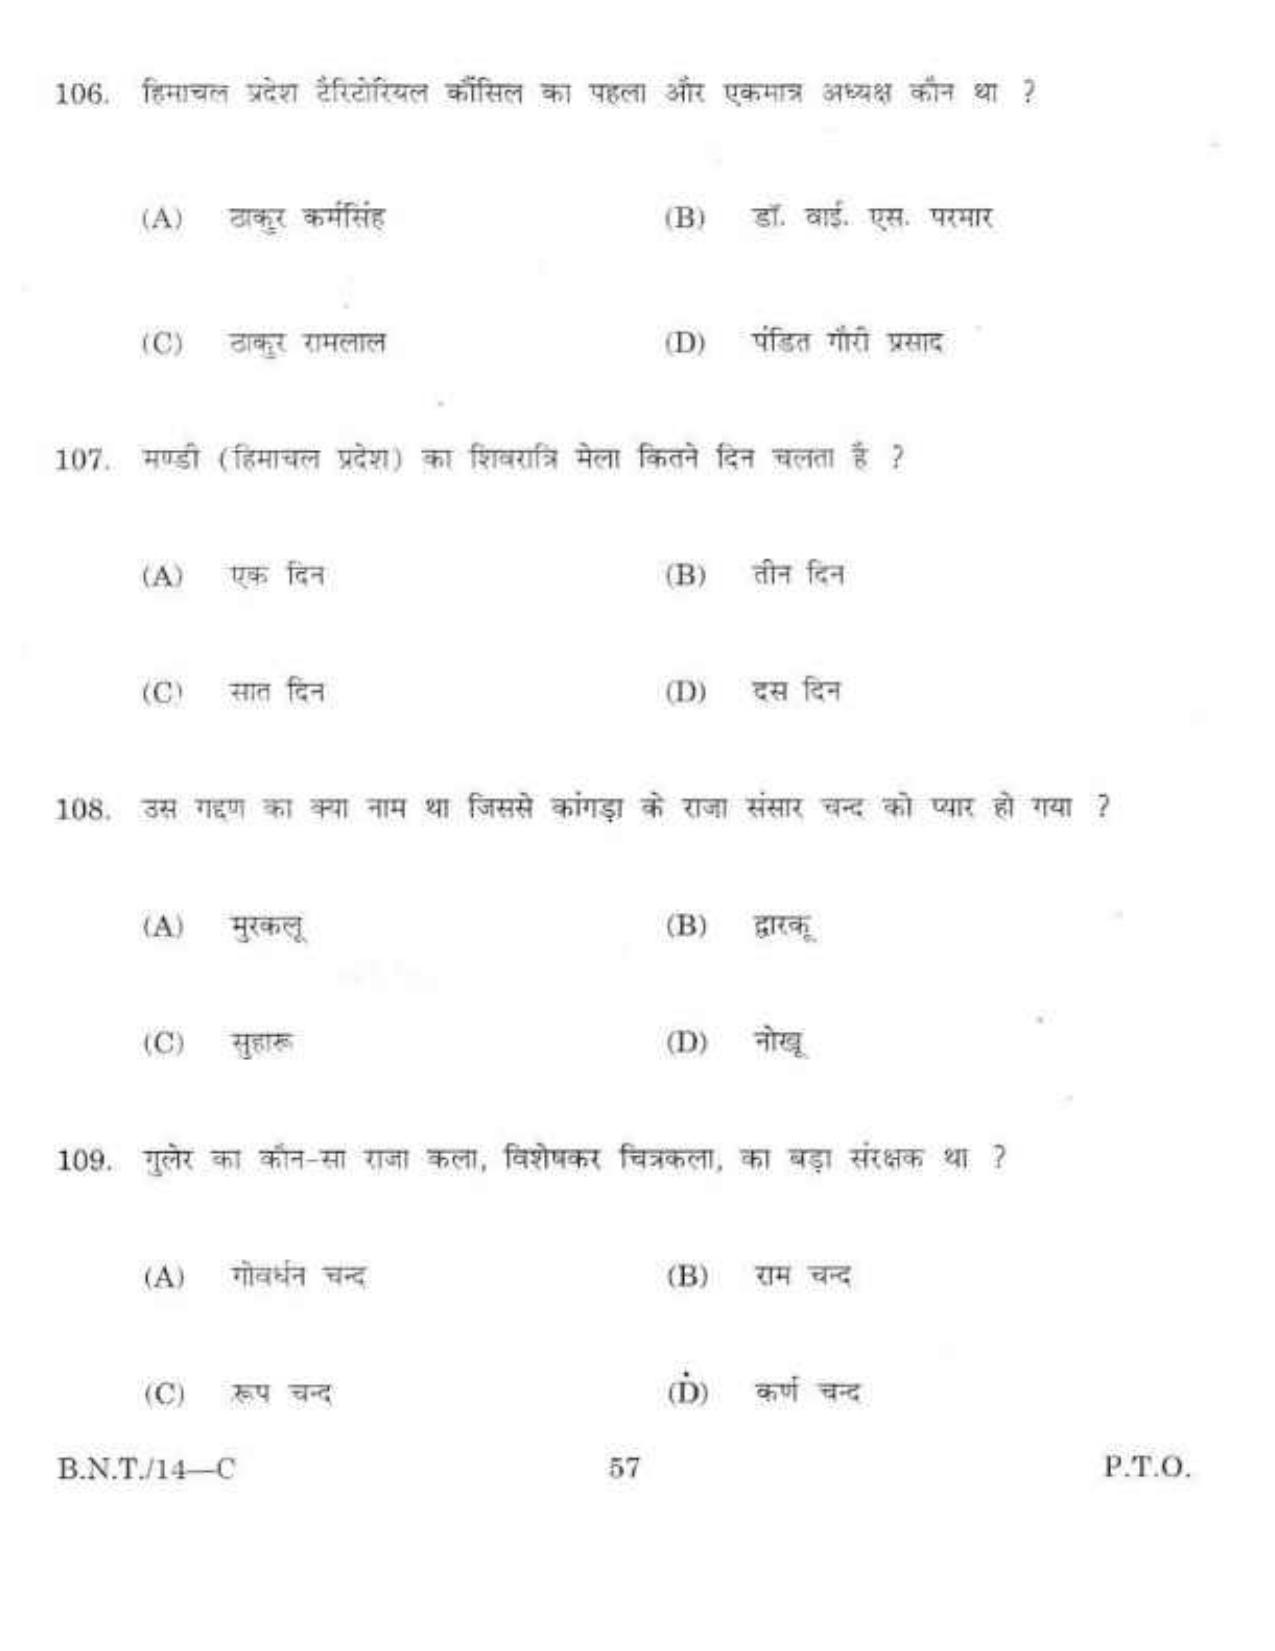 BSMFC Recovery Agent Old Question Papers for General Knowledge - Page 57